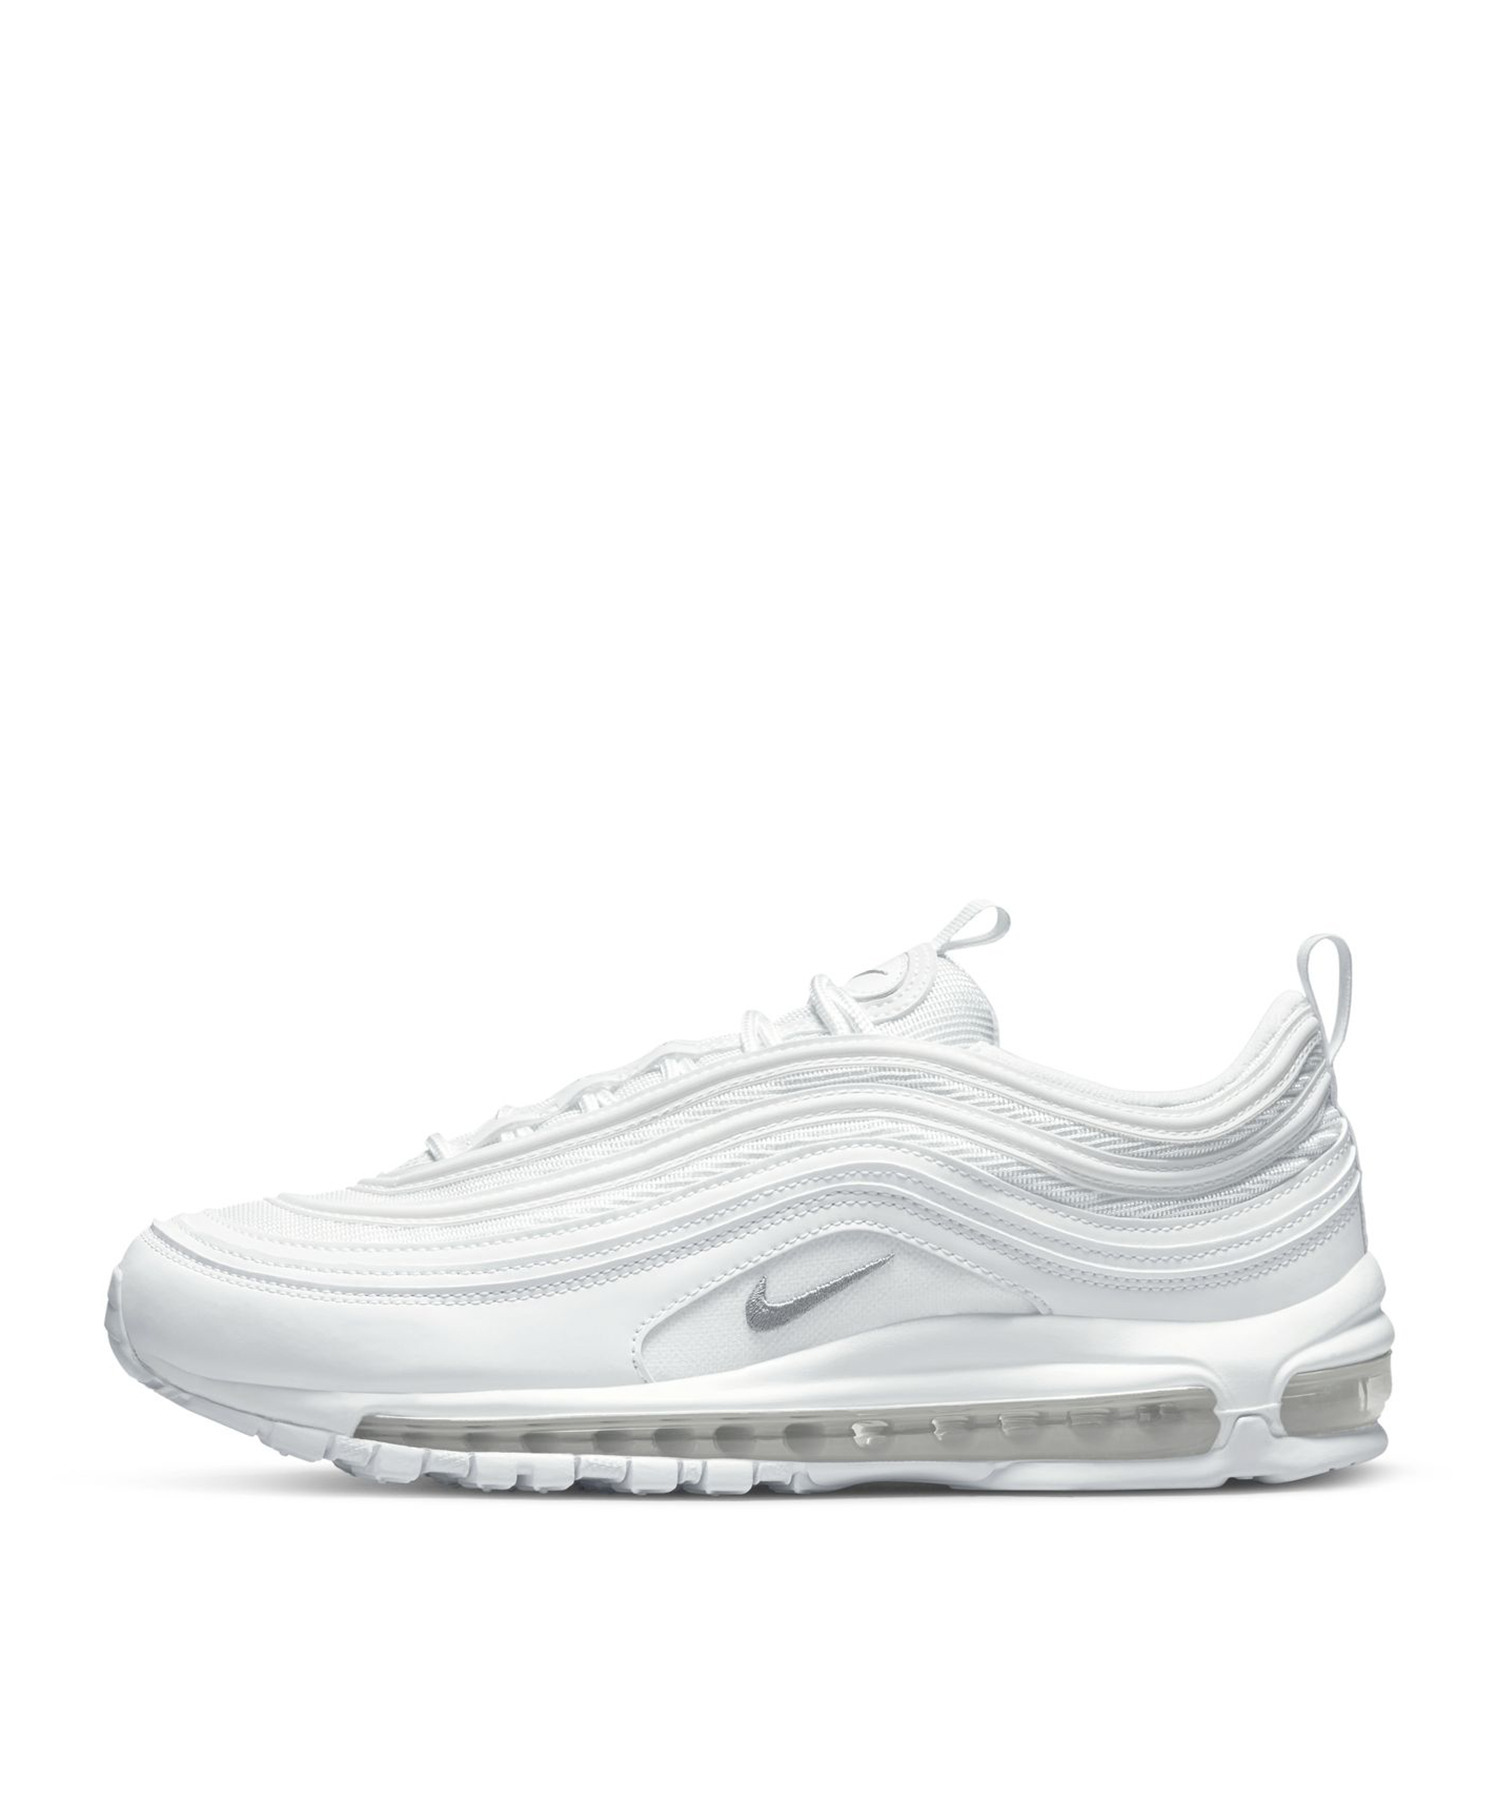 NIKE / AIR MAX 97｜ESTNATION ONLINE STORE｜エストネーション 公式通販